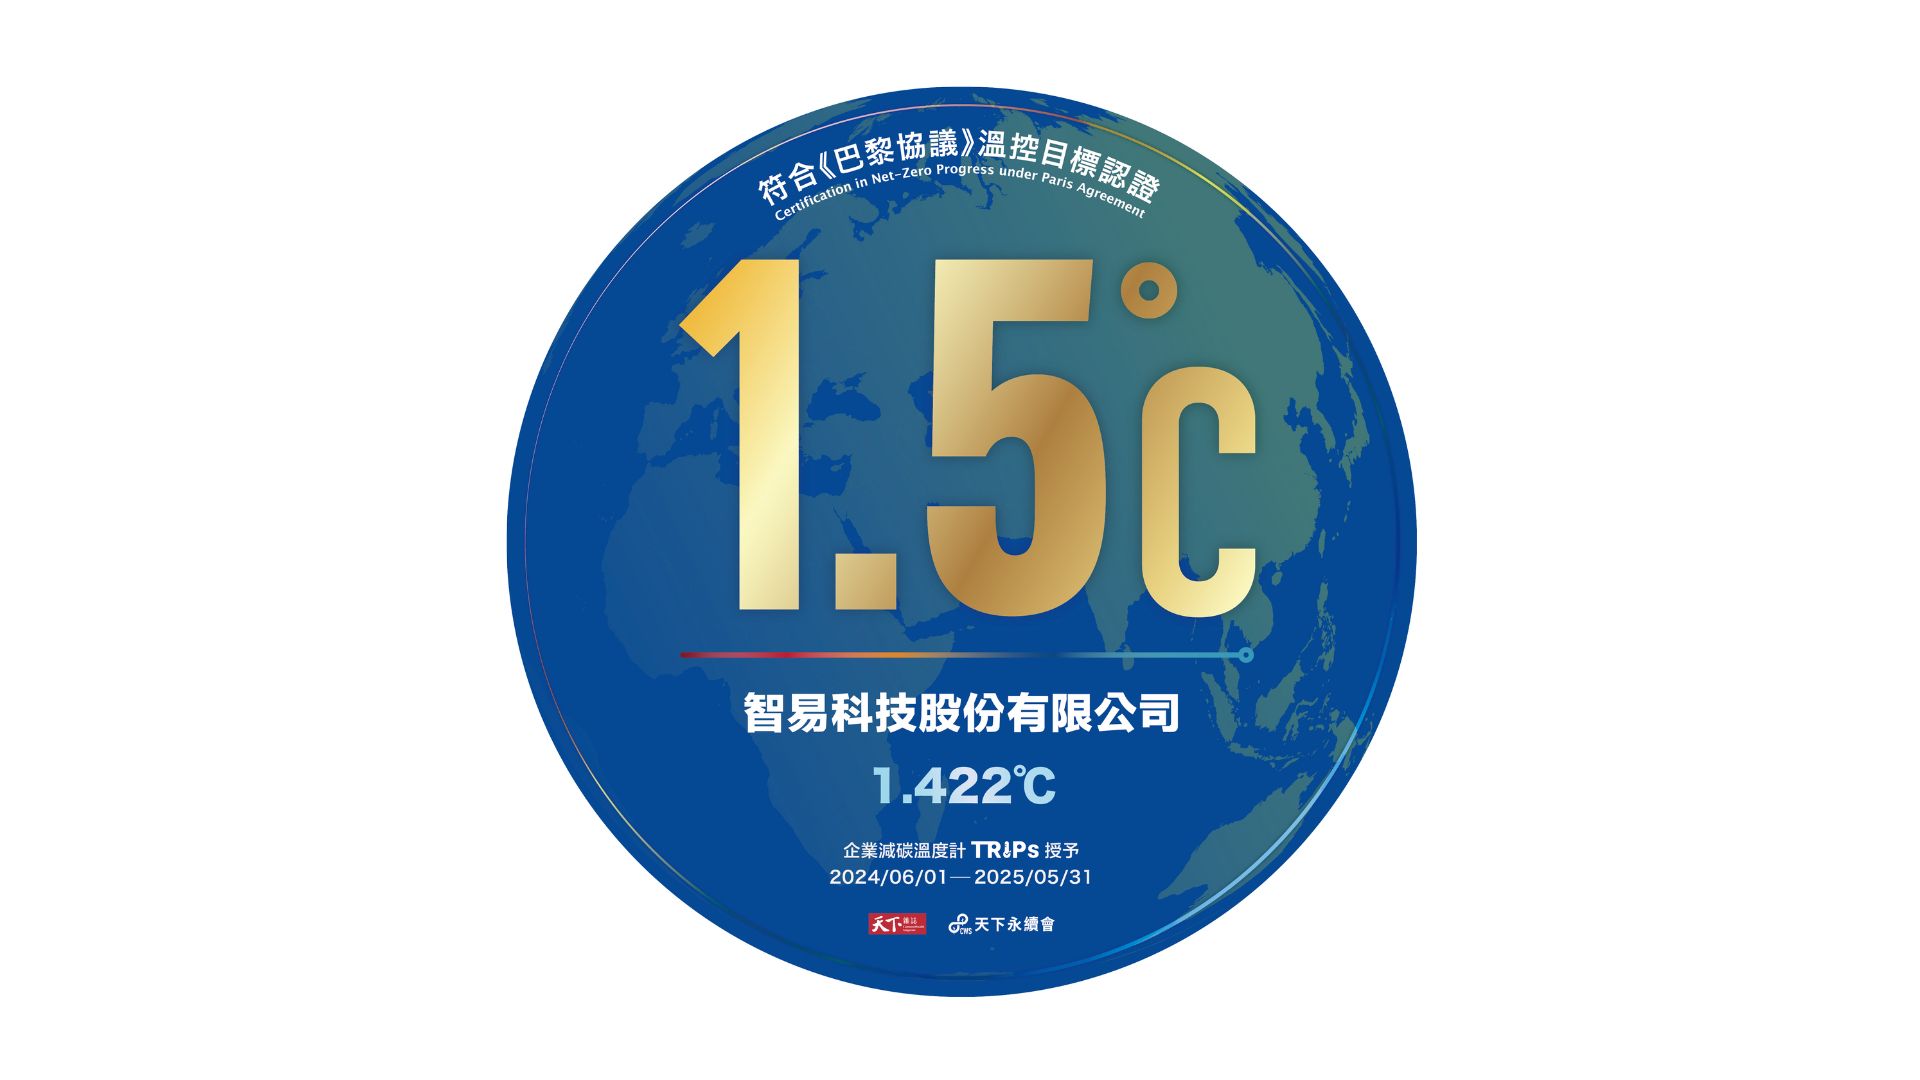 Arcadyan Receives "Excellent" Rating in Temperature Rising Index for Pathways (TRIPs) and Achieves 1.5°C Corporate Temperature Control Target.